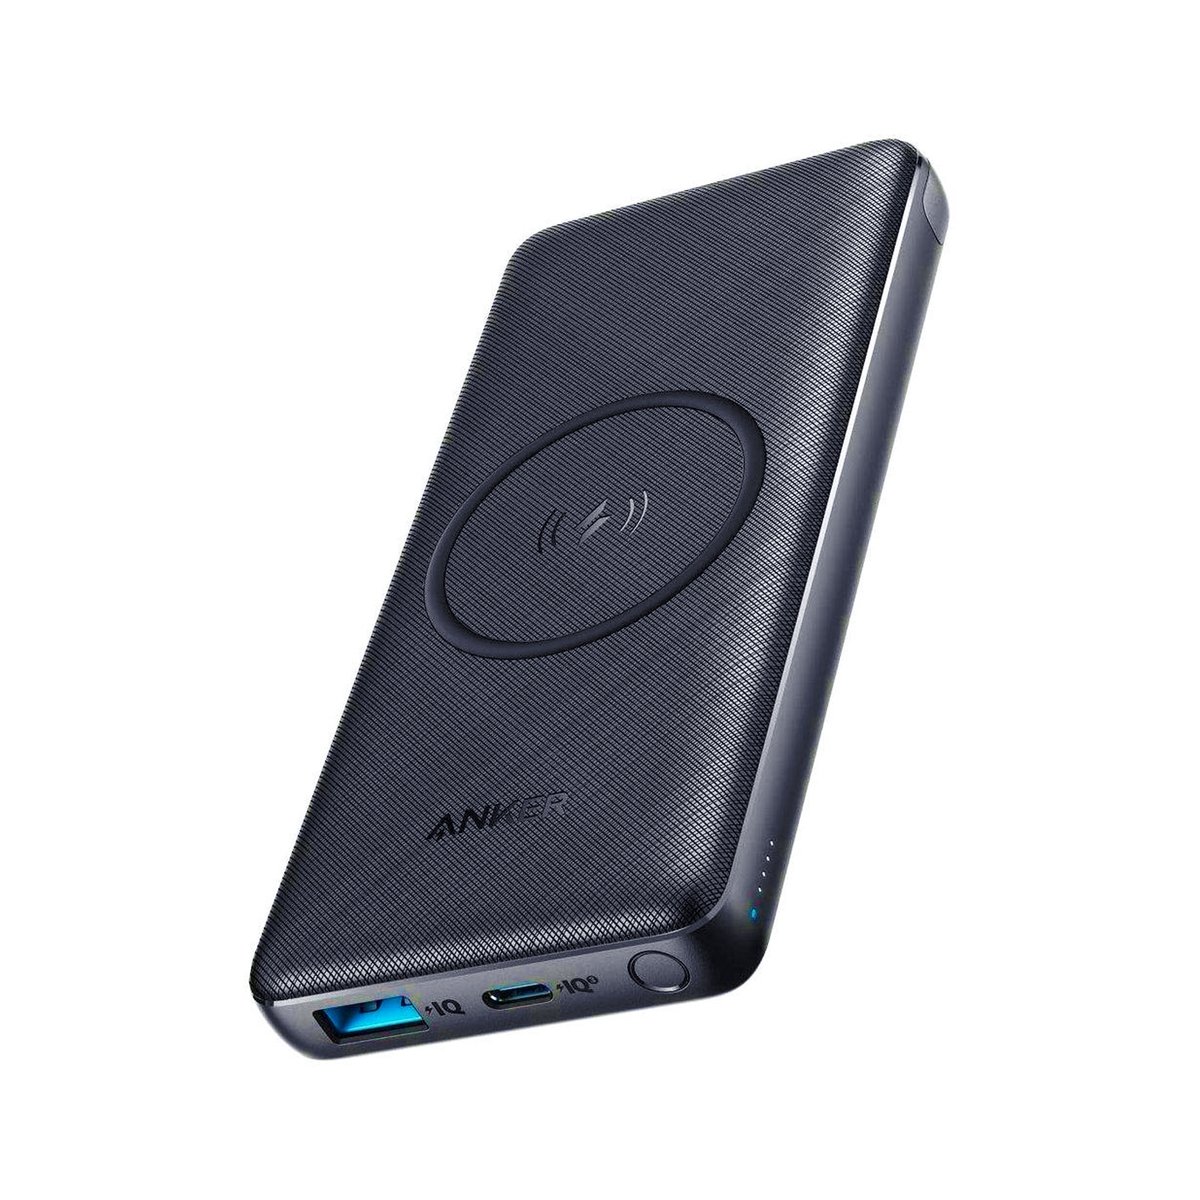 Anker's latest MagSafe power bank is one beefy battery